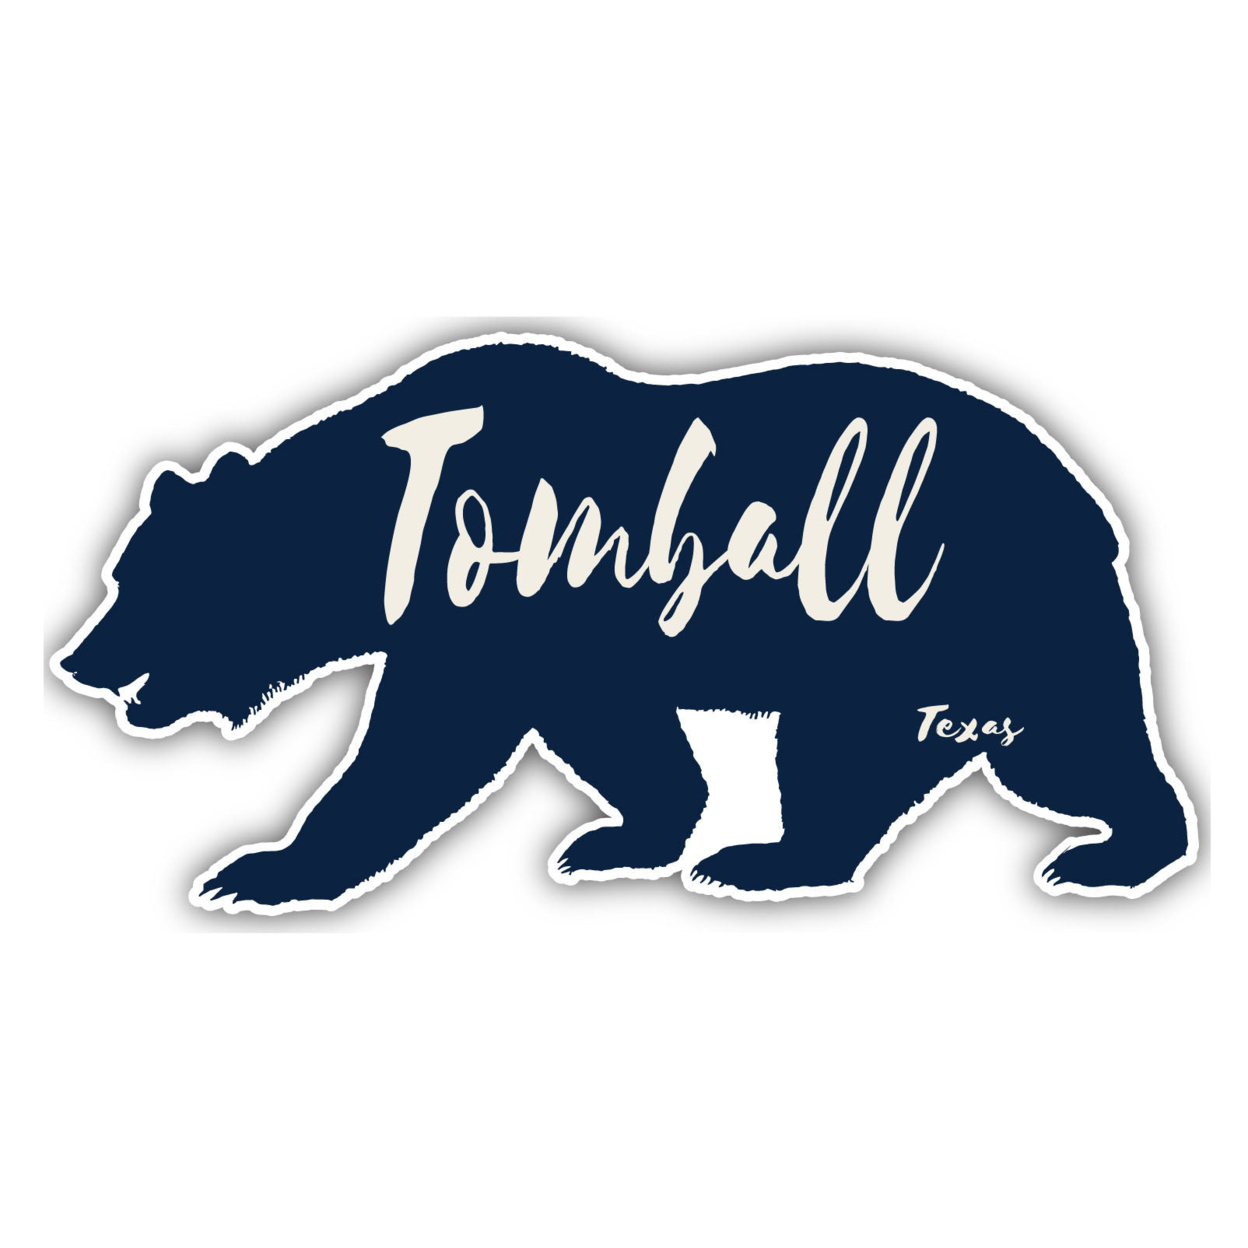 Tomball Texas Souvenir Decorative Stickers (Choose Theme And Size) - Single Unit, 4-Inch, Great Outdoors